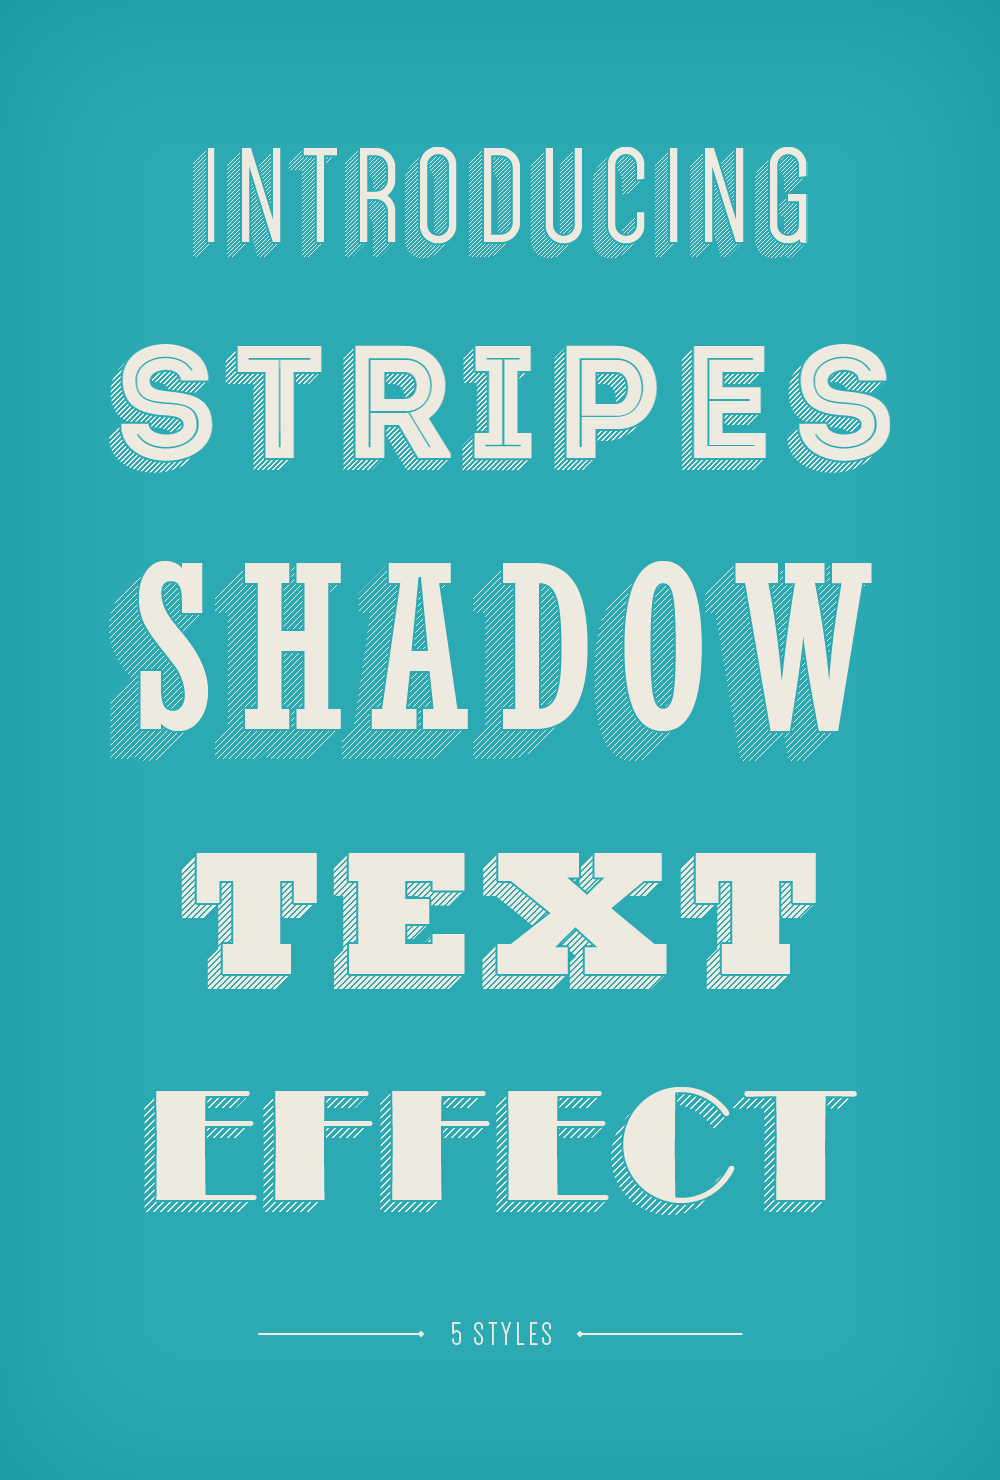 Stripes Shadow Text Effect | GraphicBurger